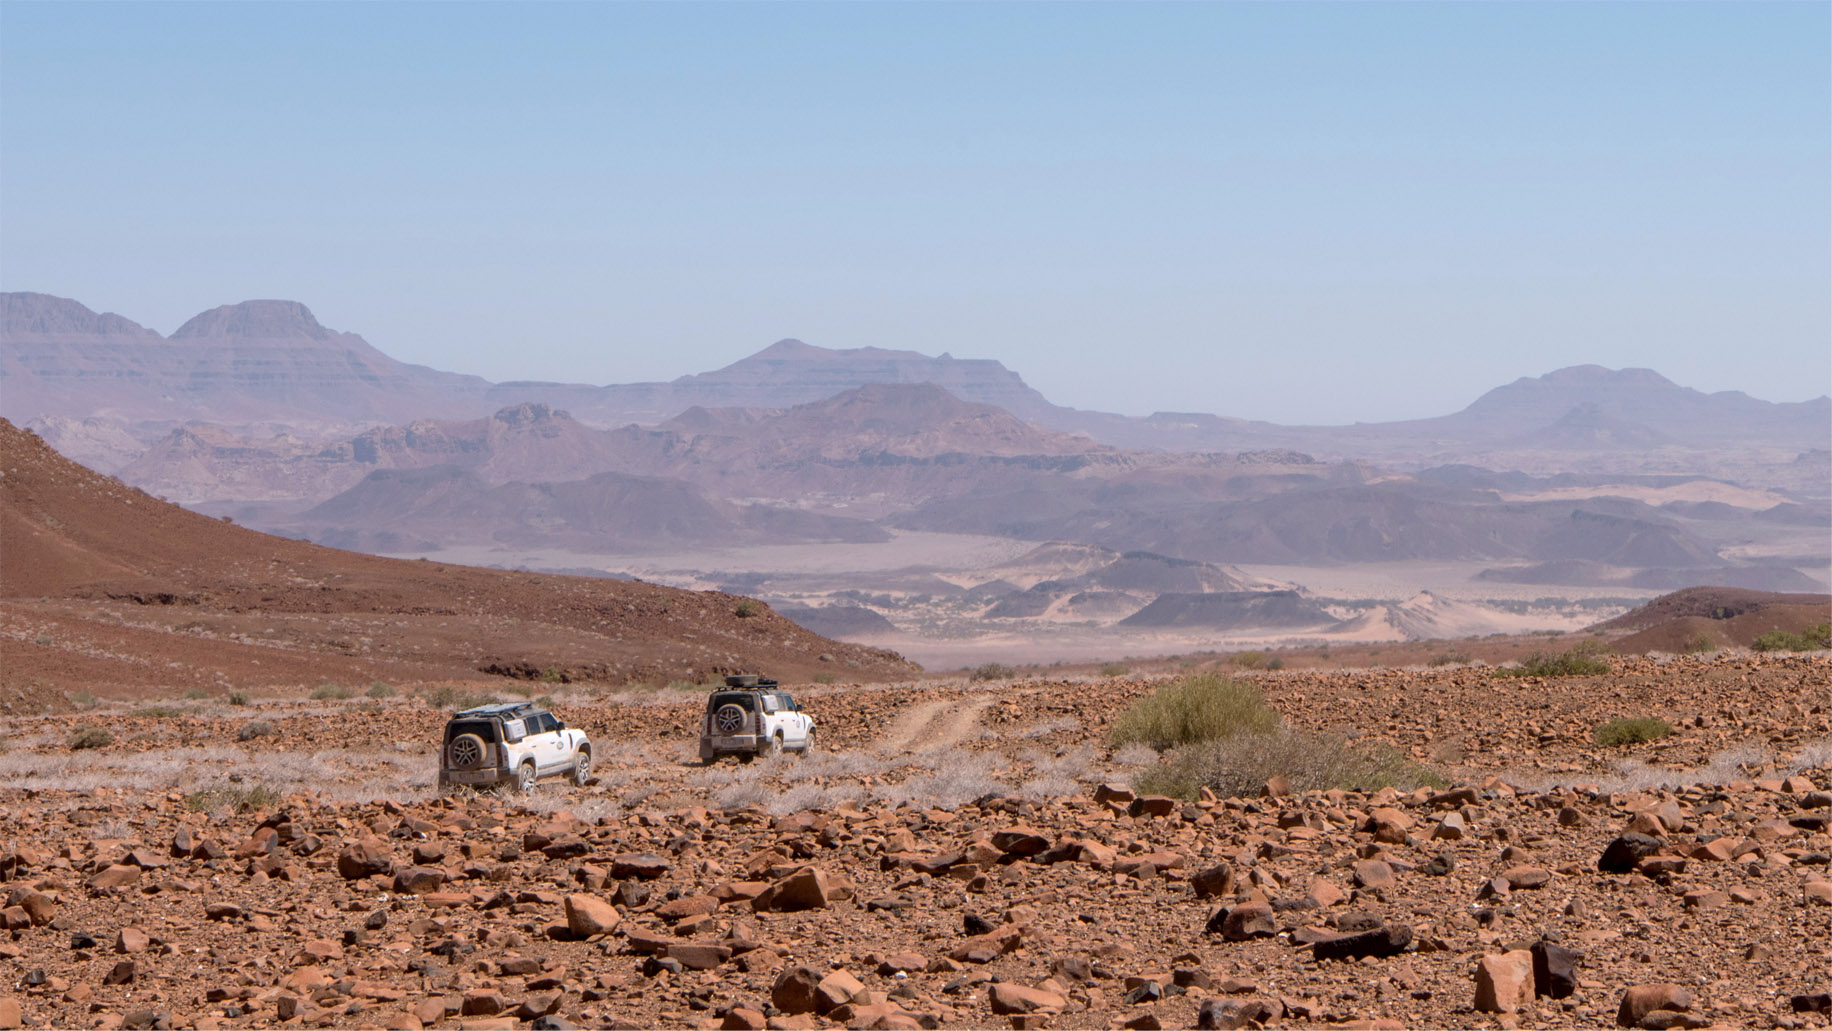 Land Rover Experience Namibia